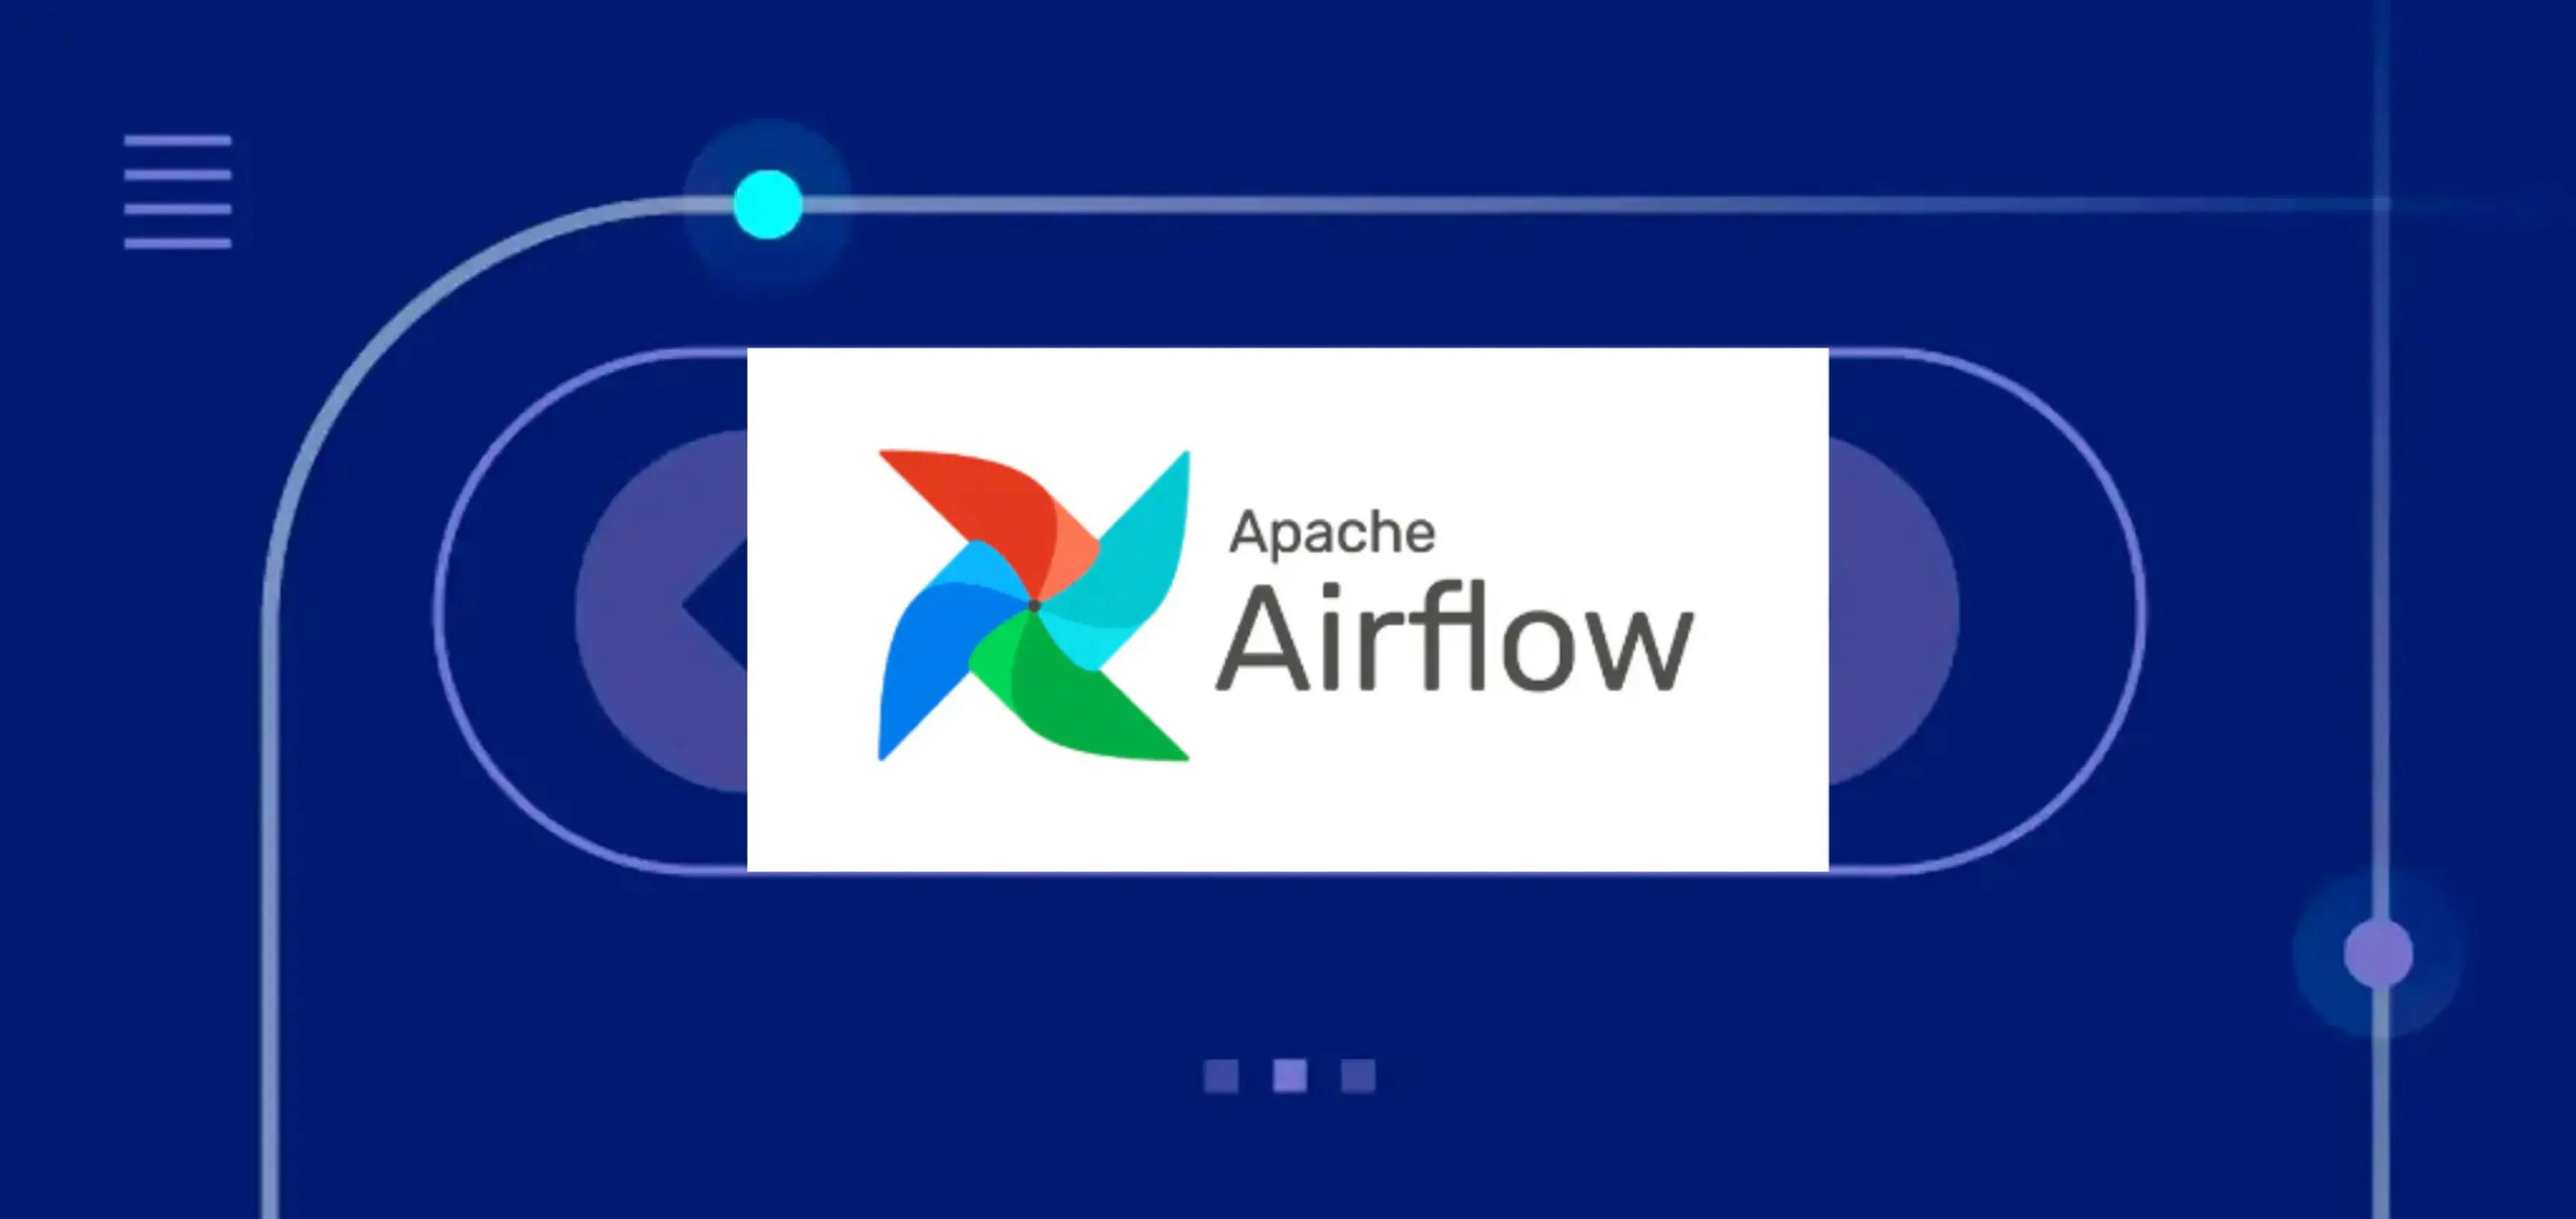 What is Apache Airflow?